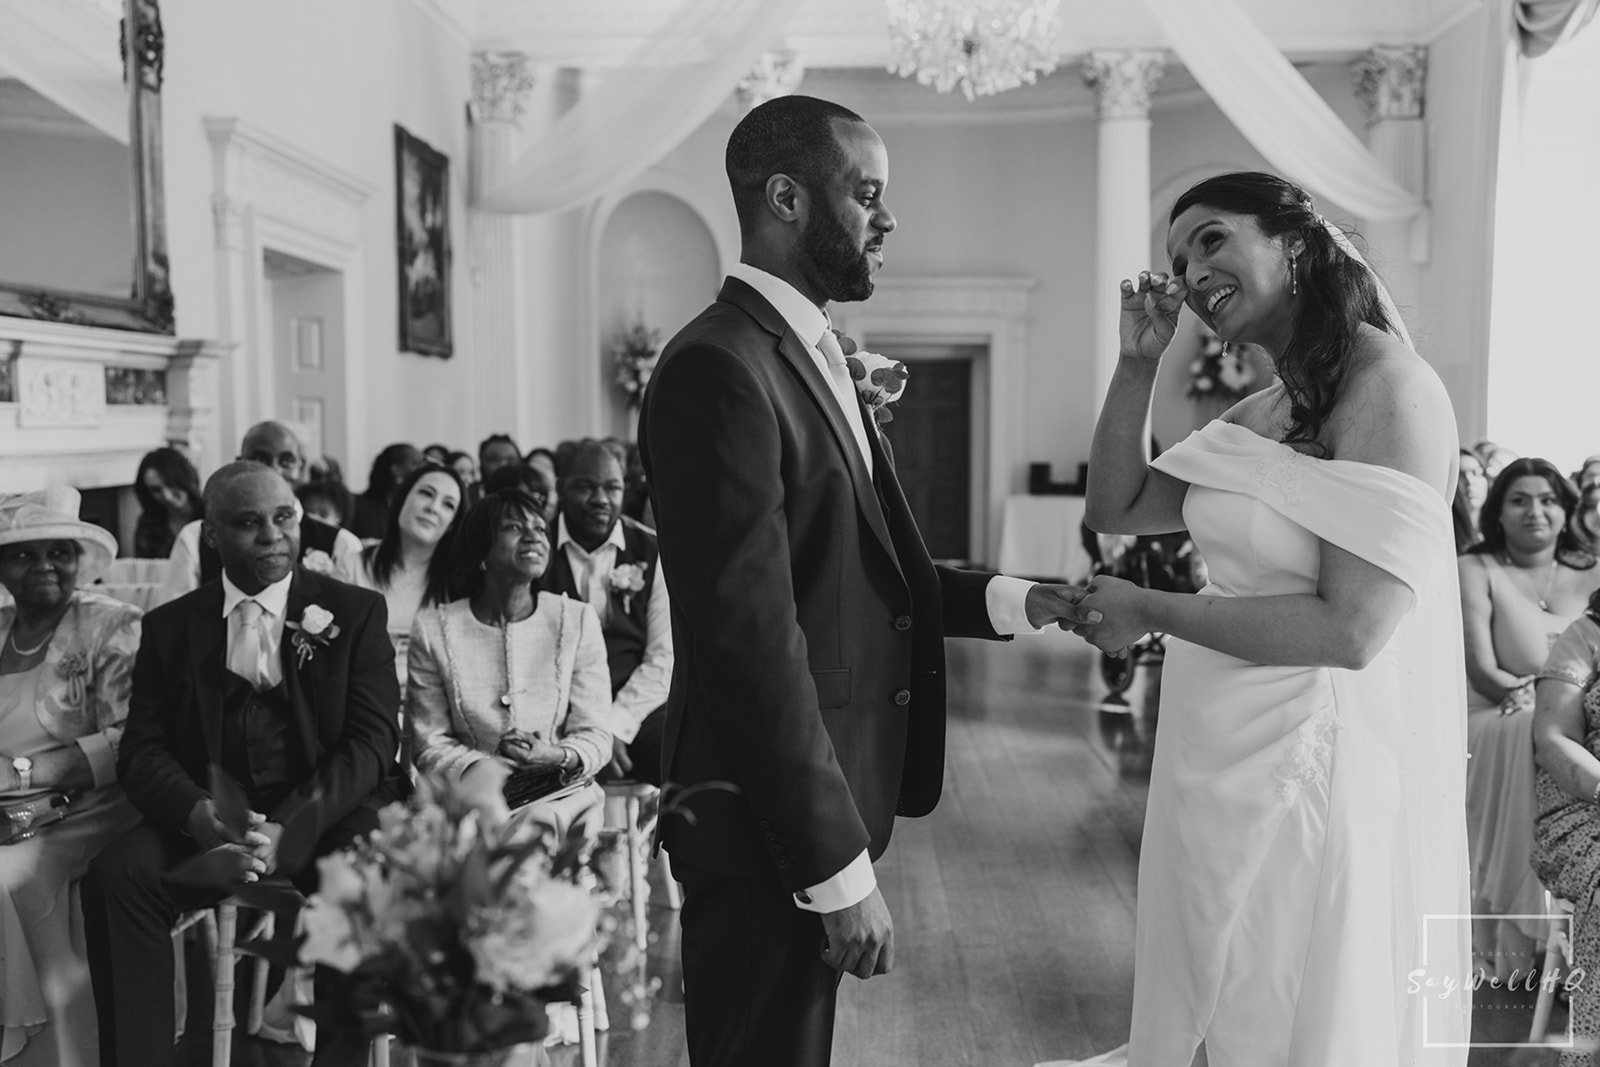 Documentary Wedding Photography Portfolio - bride getting emotional during the wedding ceremony at Colwick Hall